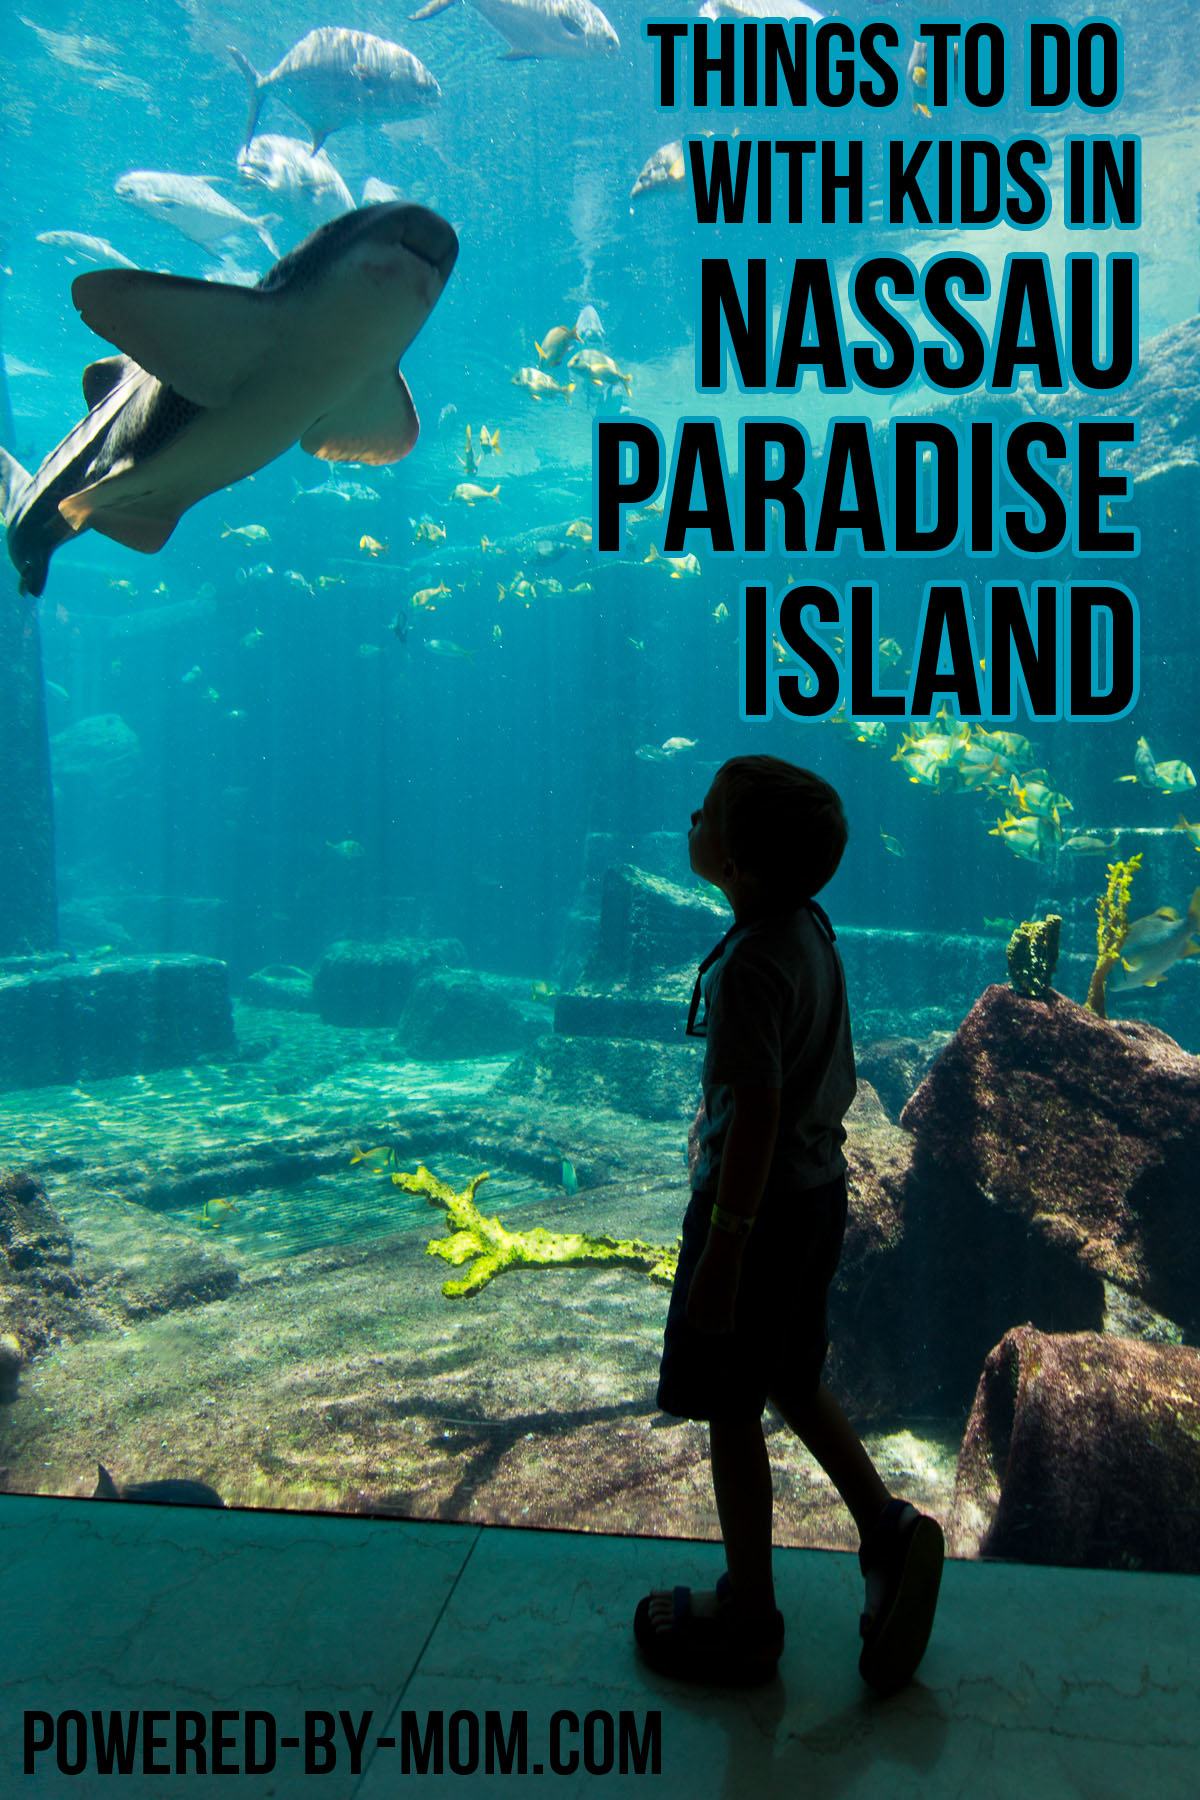 Things to Do With Kids in Nassau Paradise Island